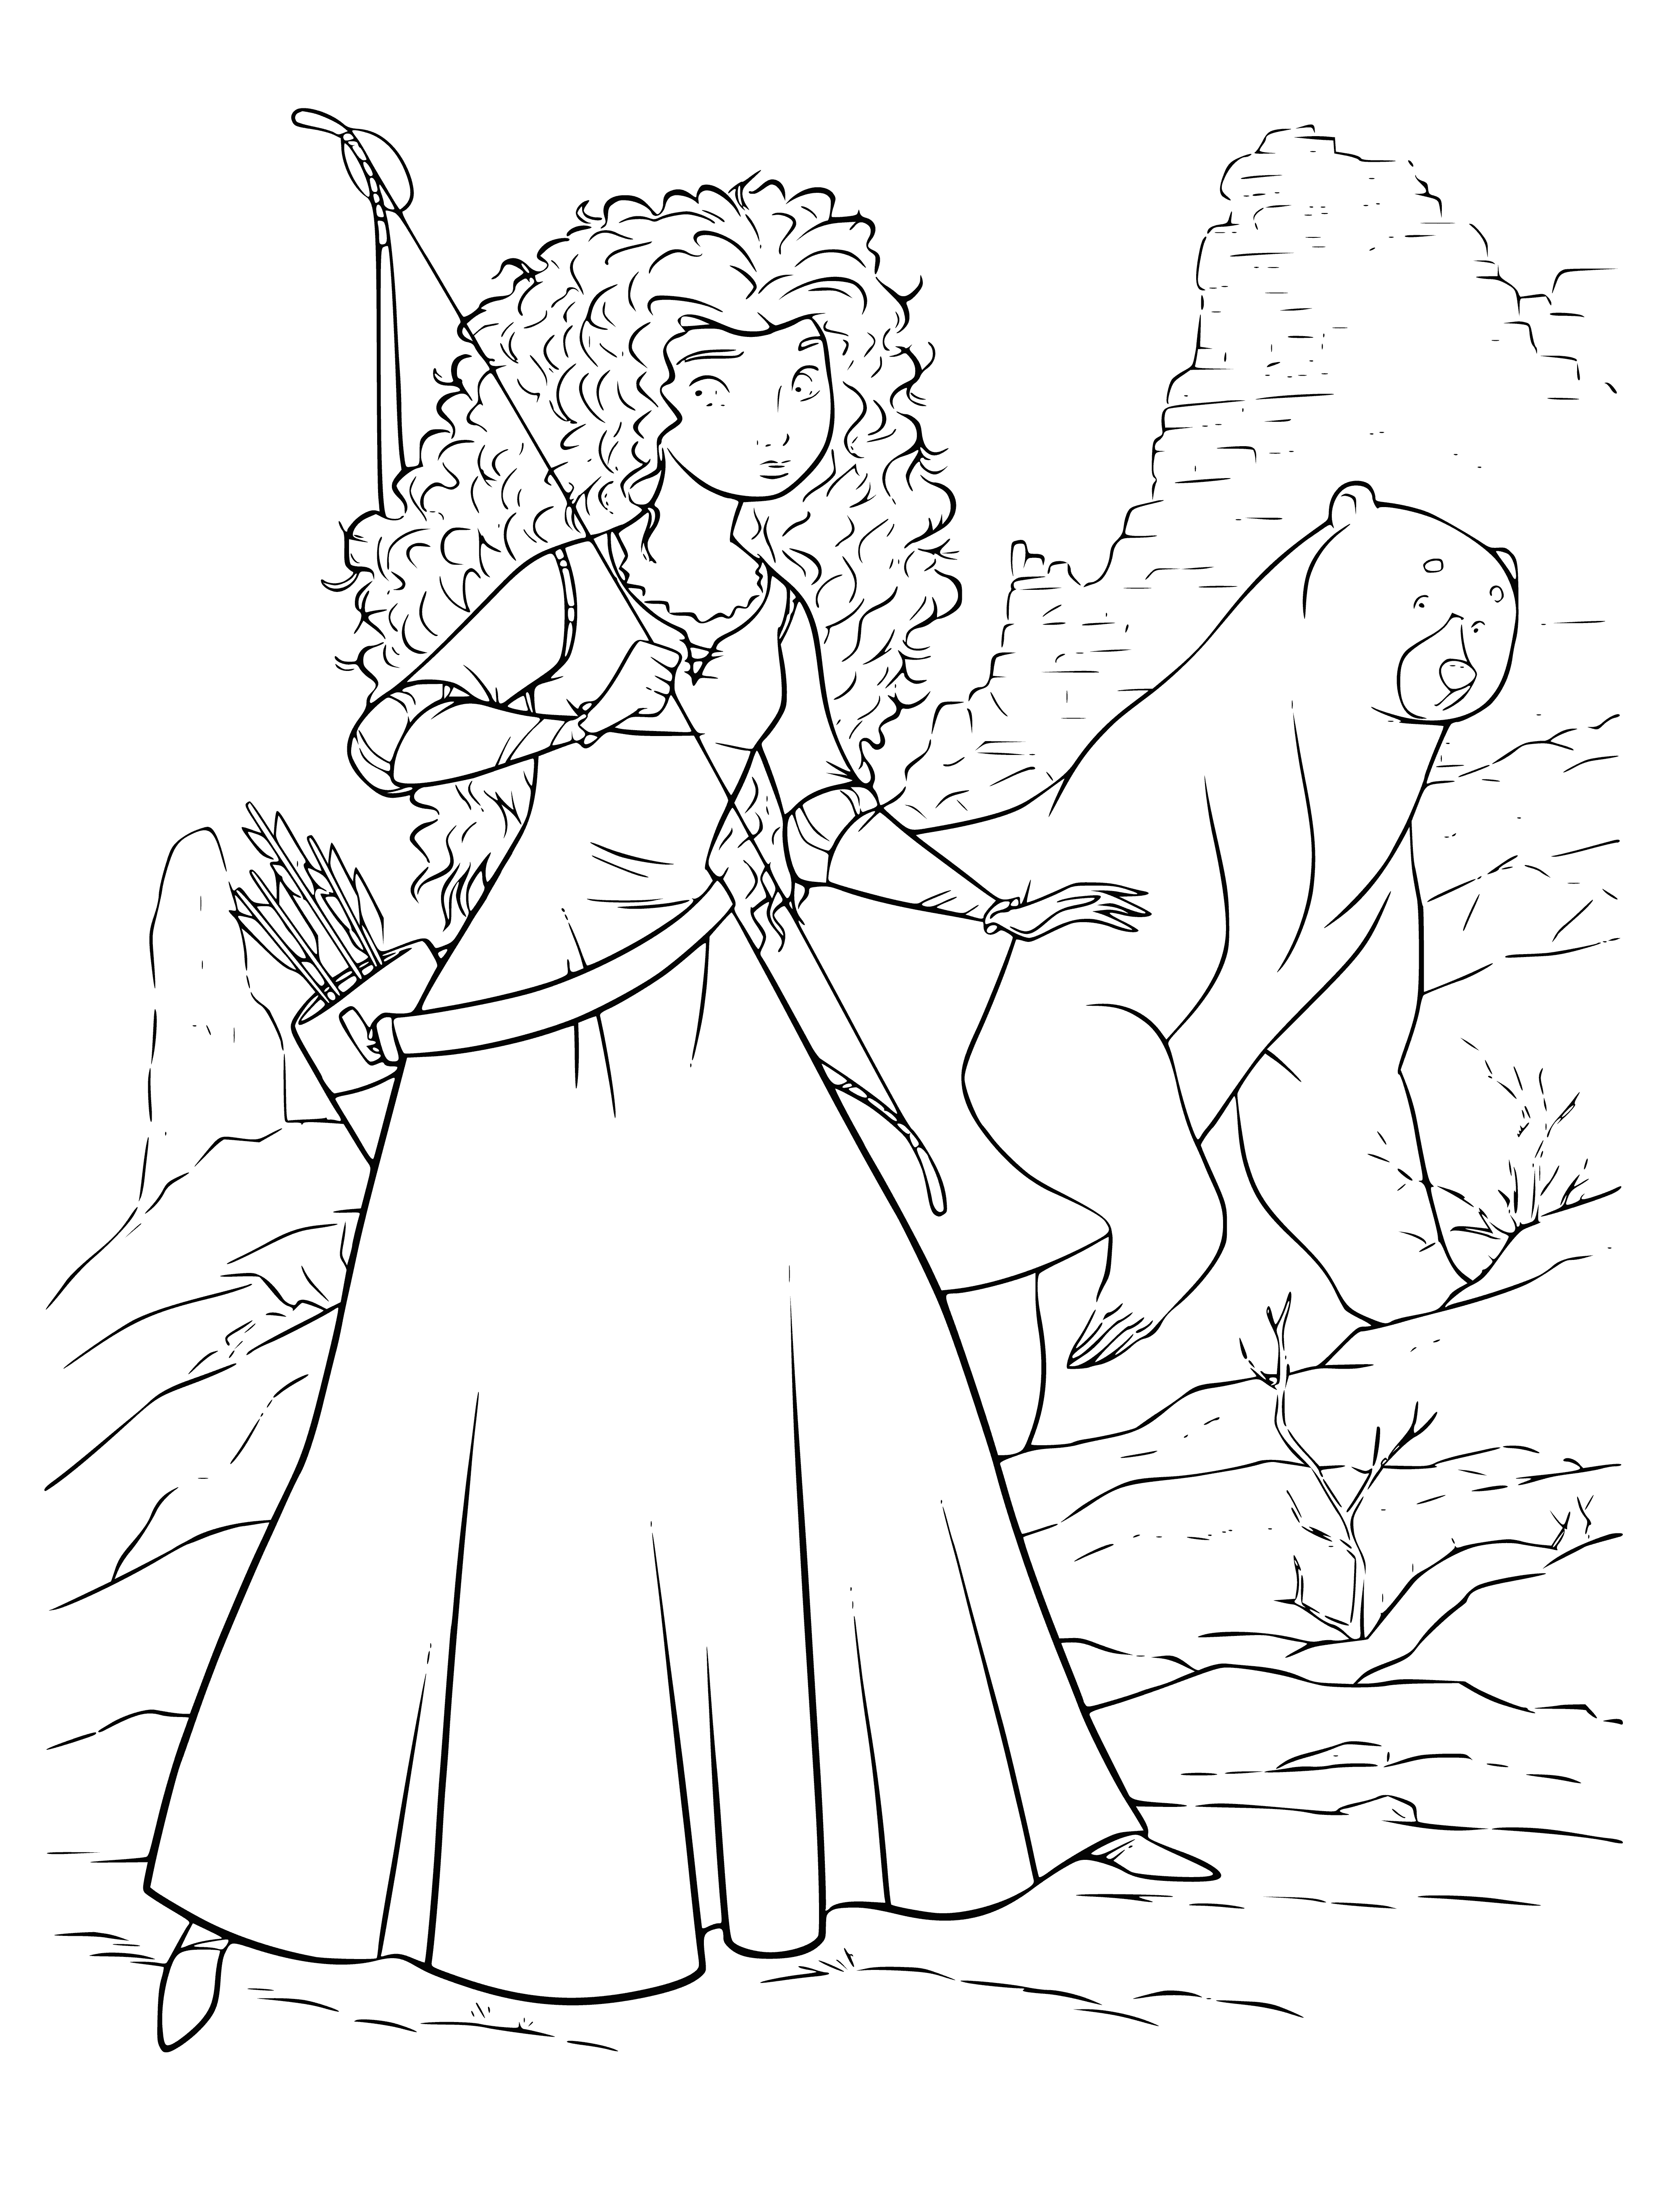 coloring page: Princess Merida stands below Bear Queen atop castle ruins, both looking at each other. #Fairytale #OnceUponATime